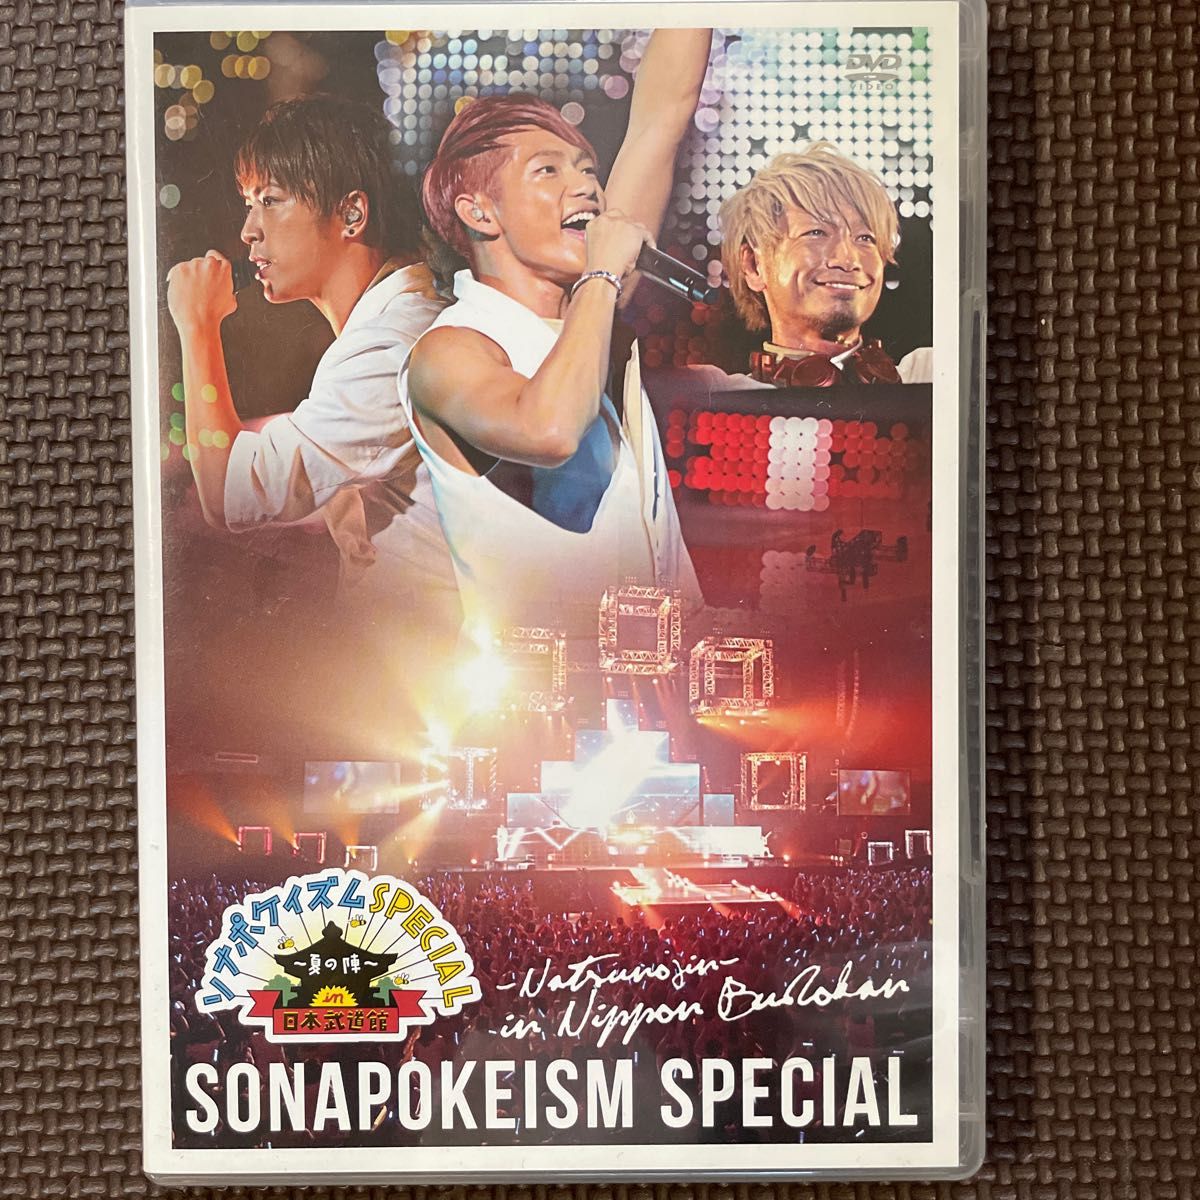 A ソナーポケット 夏の陣 日本武道館 DVD ソナポケイズムSPECIAL